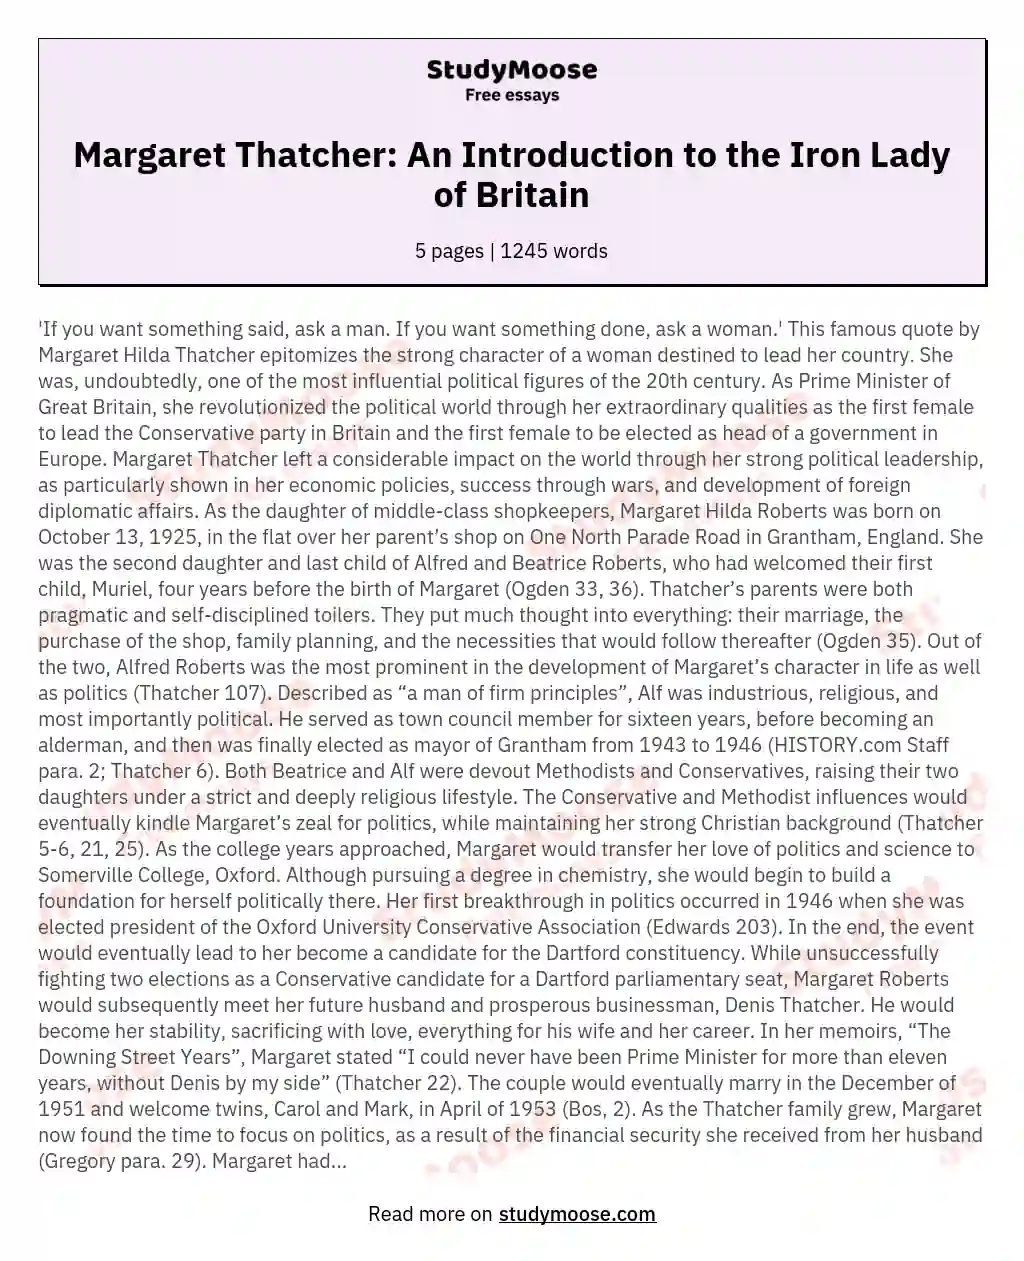 Margaret Thatcher: An Introduction to the Iron Lady of Britain essay